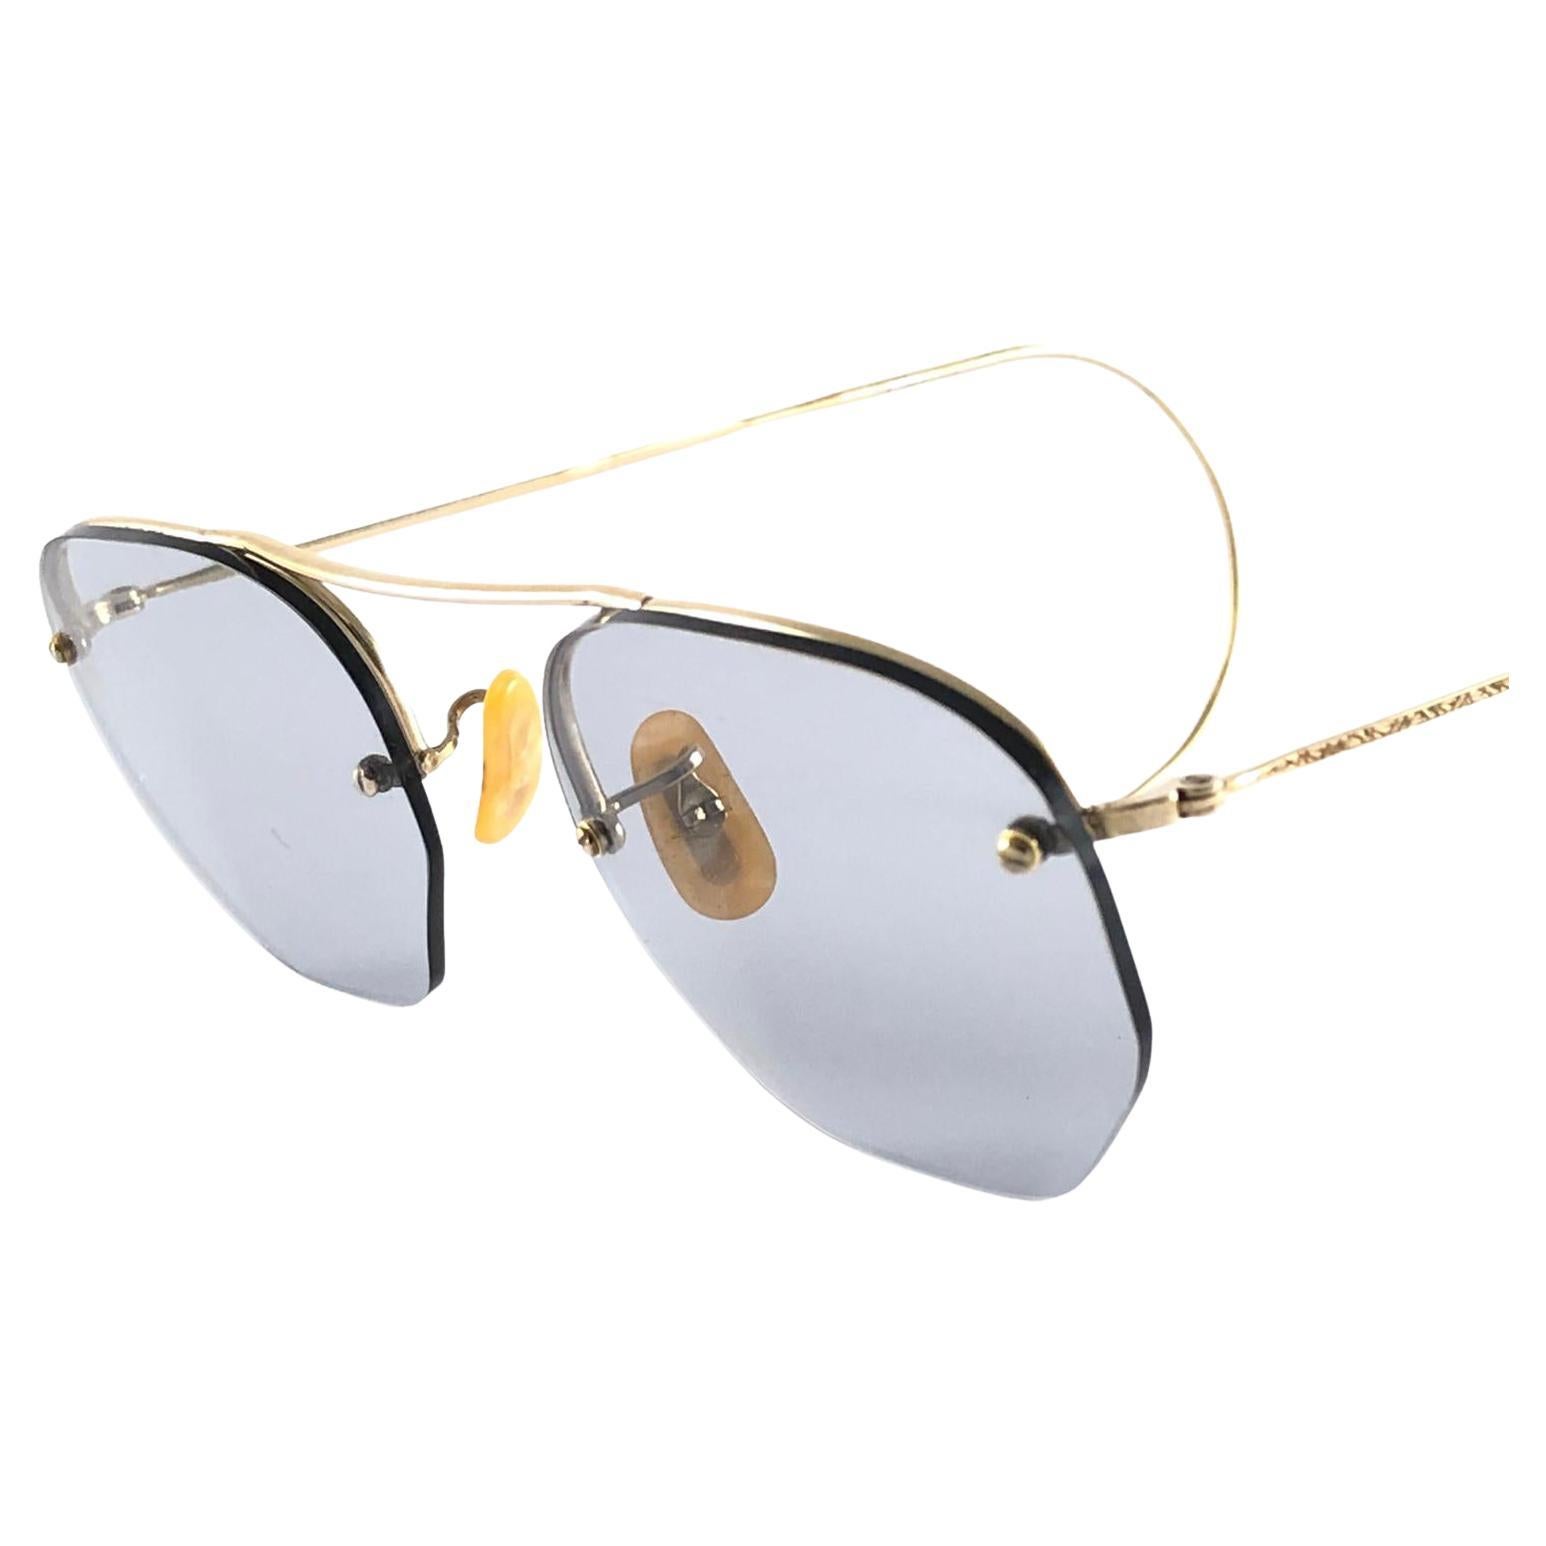 Superb Item! 1940's Bausch & Lomb delicate ornamented 12k gold plated rimless sunglasses.

Curled ear paddles. original nose pieces. 

Please note that this item is nearly 80 years old and has some ageing patina on the frame. 
A beautiful piece of